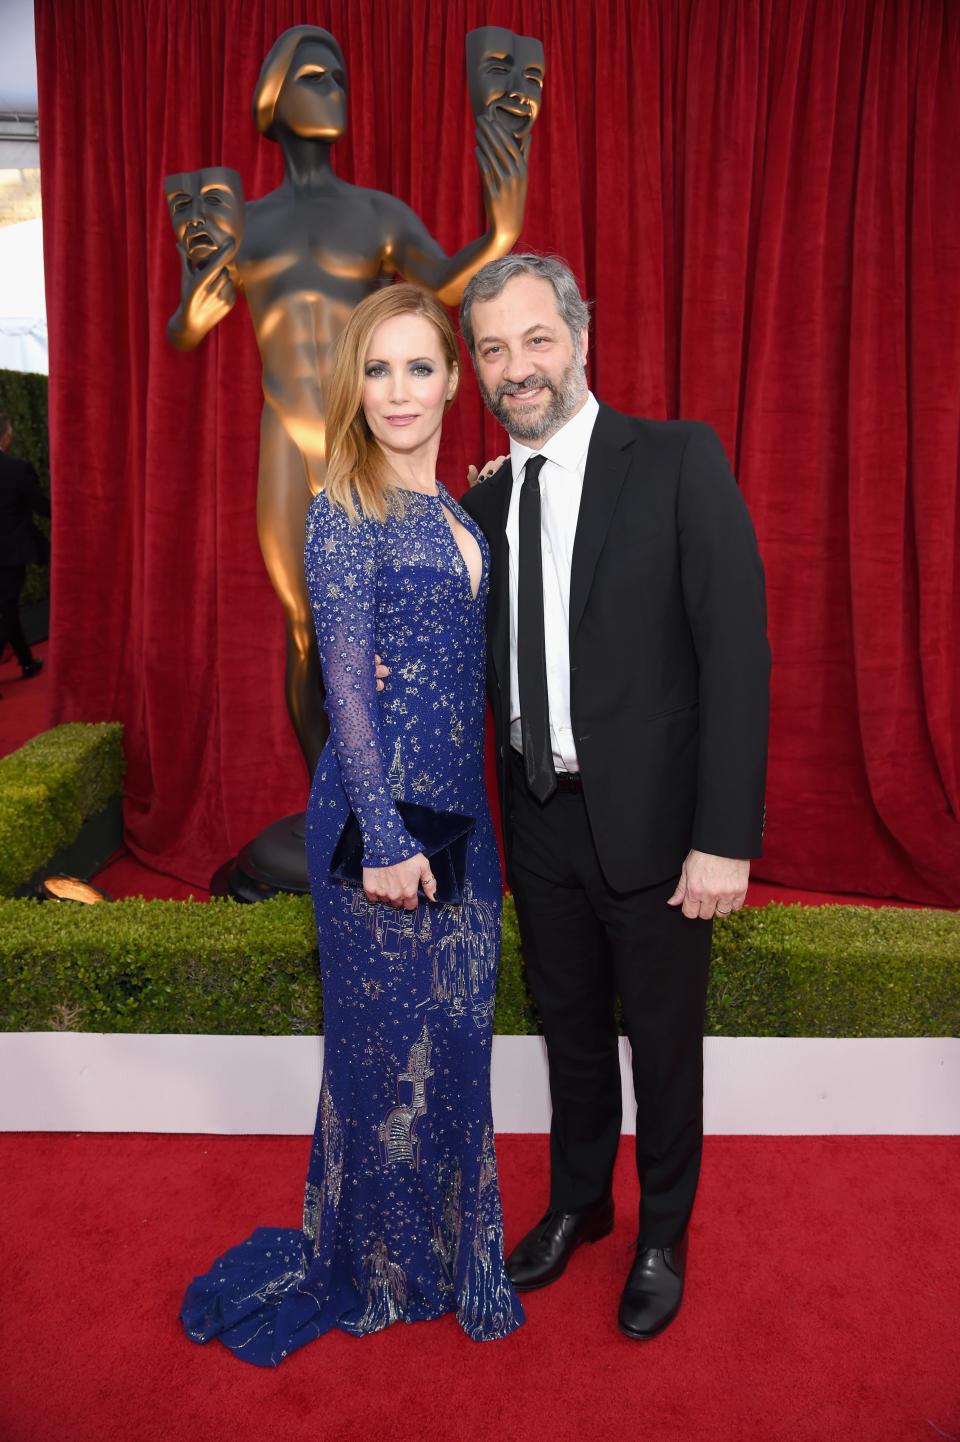 <h1 class="title">Leslie Mann in Zuhair Murad and Judd Apatow</h1> <cite class="credit">Photo: Getty Images</cite>